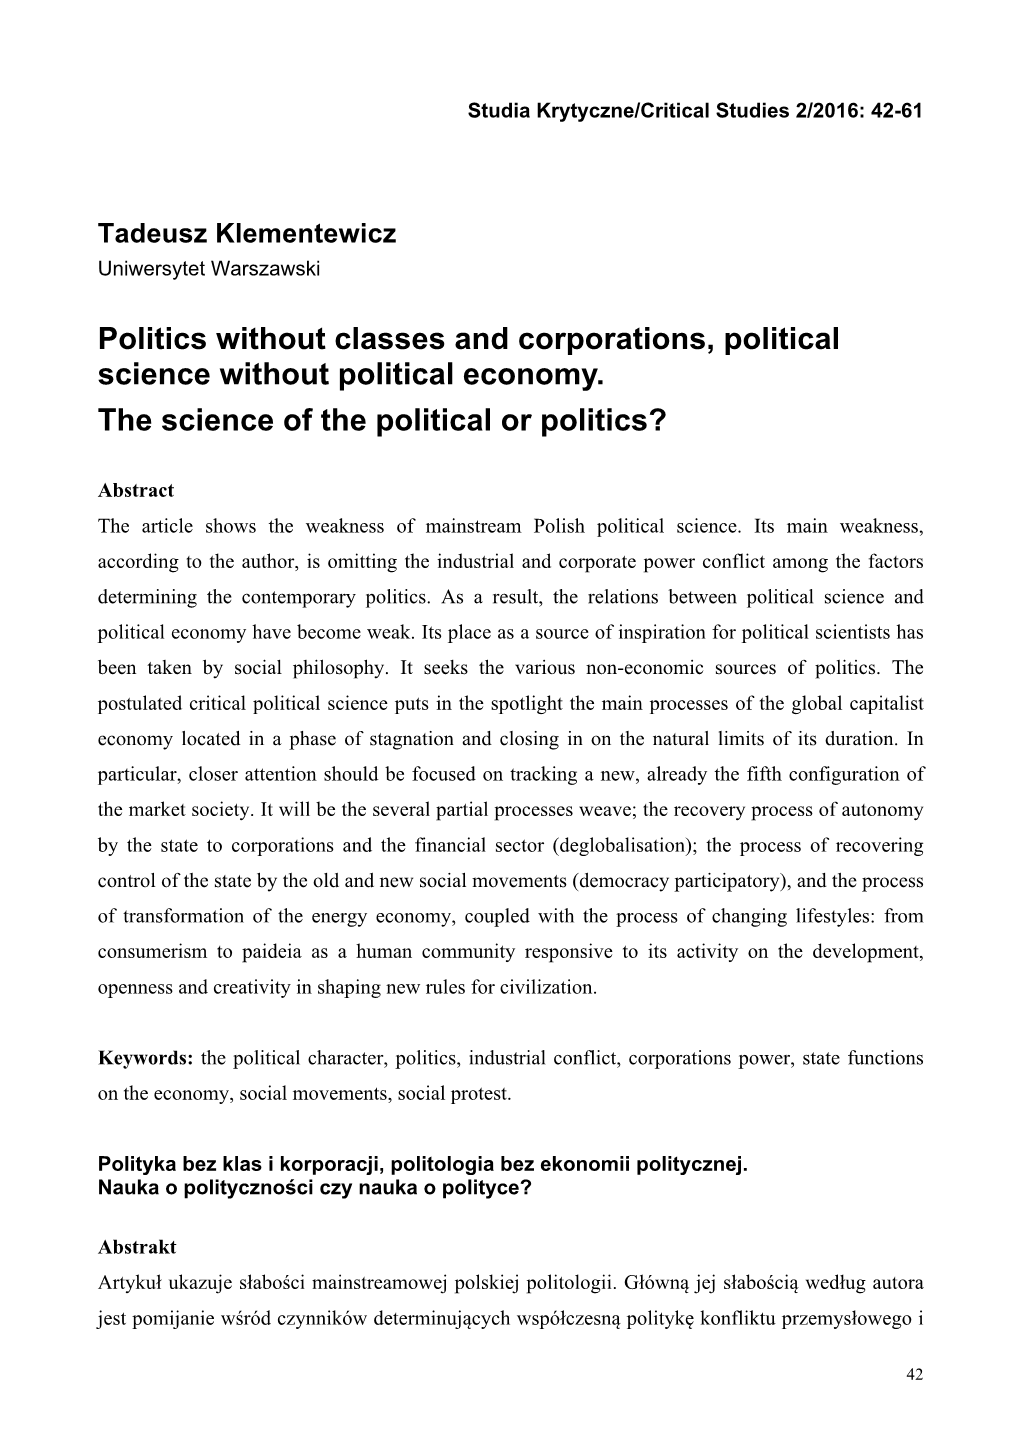 Politics Without Classes and Corporations, Political Science Without Political Economy